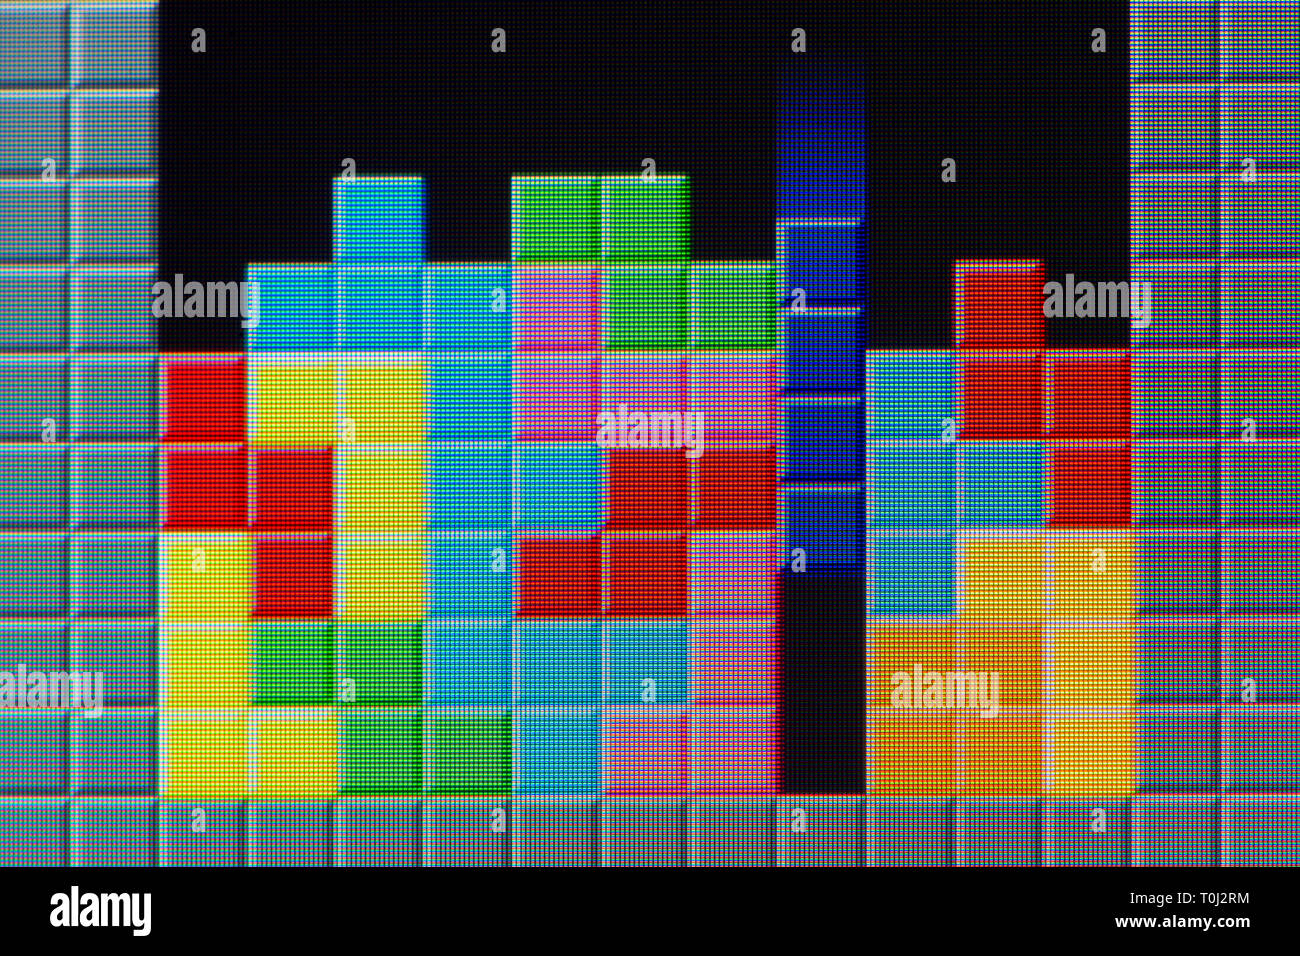 A Tetris game in seen in progress on a computer screen (Editorial use only). Stock Photo